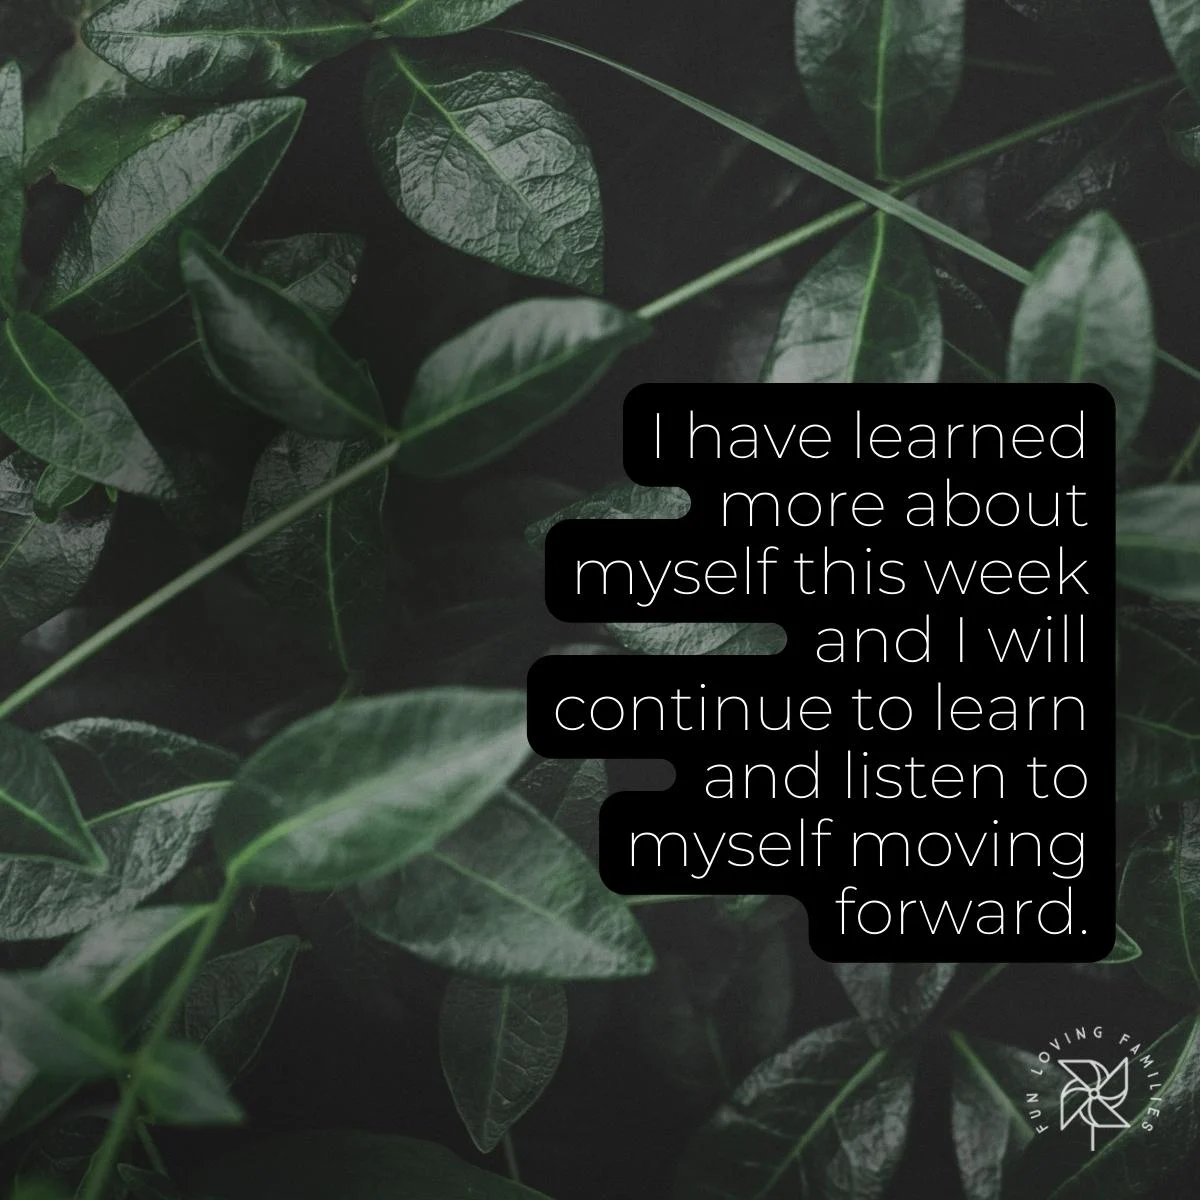 I will continue to learn and listen to myself moving forward affirmation